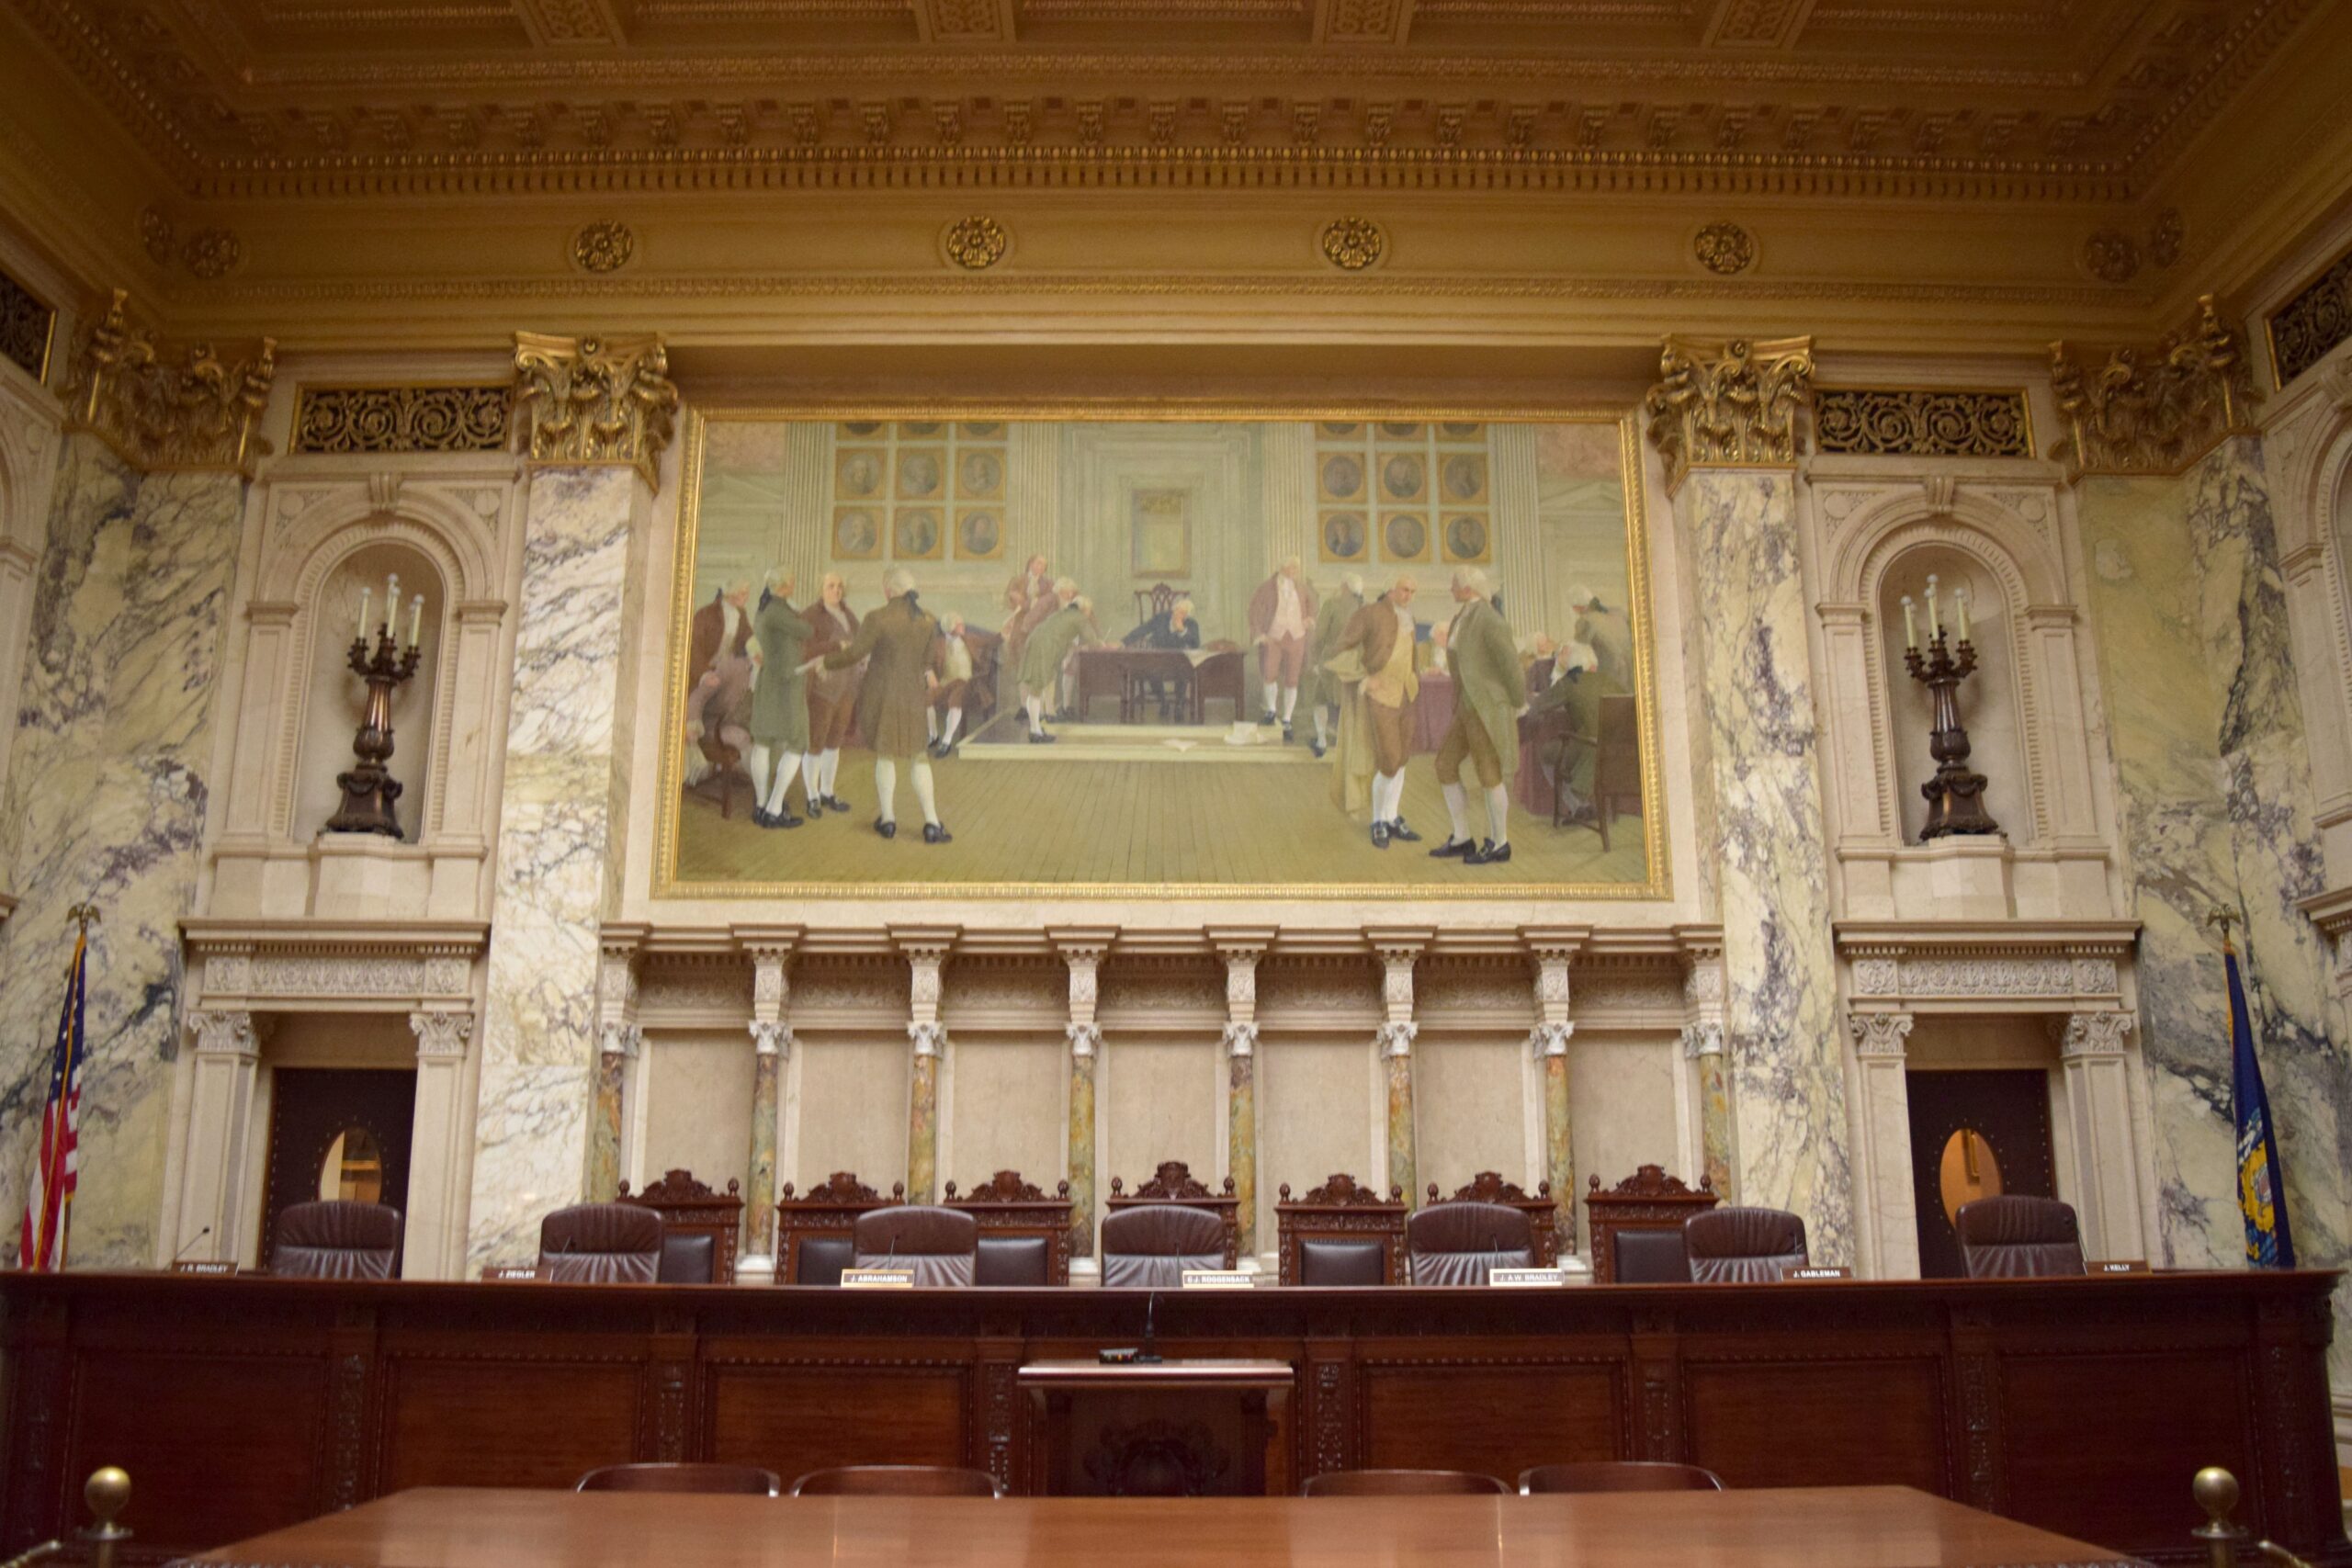 Wisconsin Supreme Court courtroom